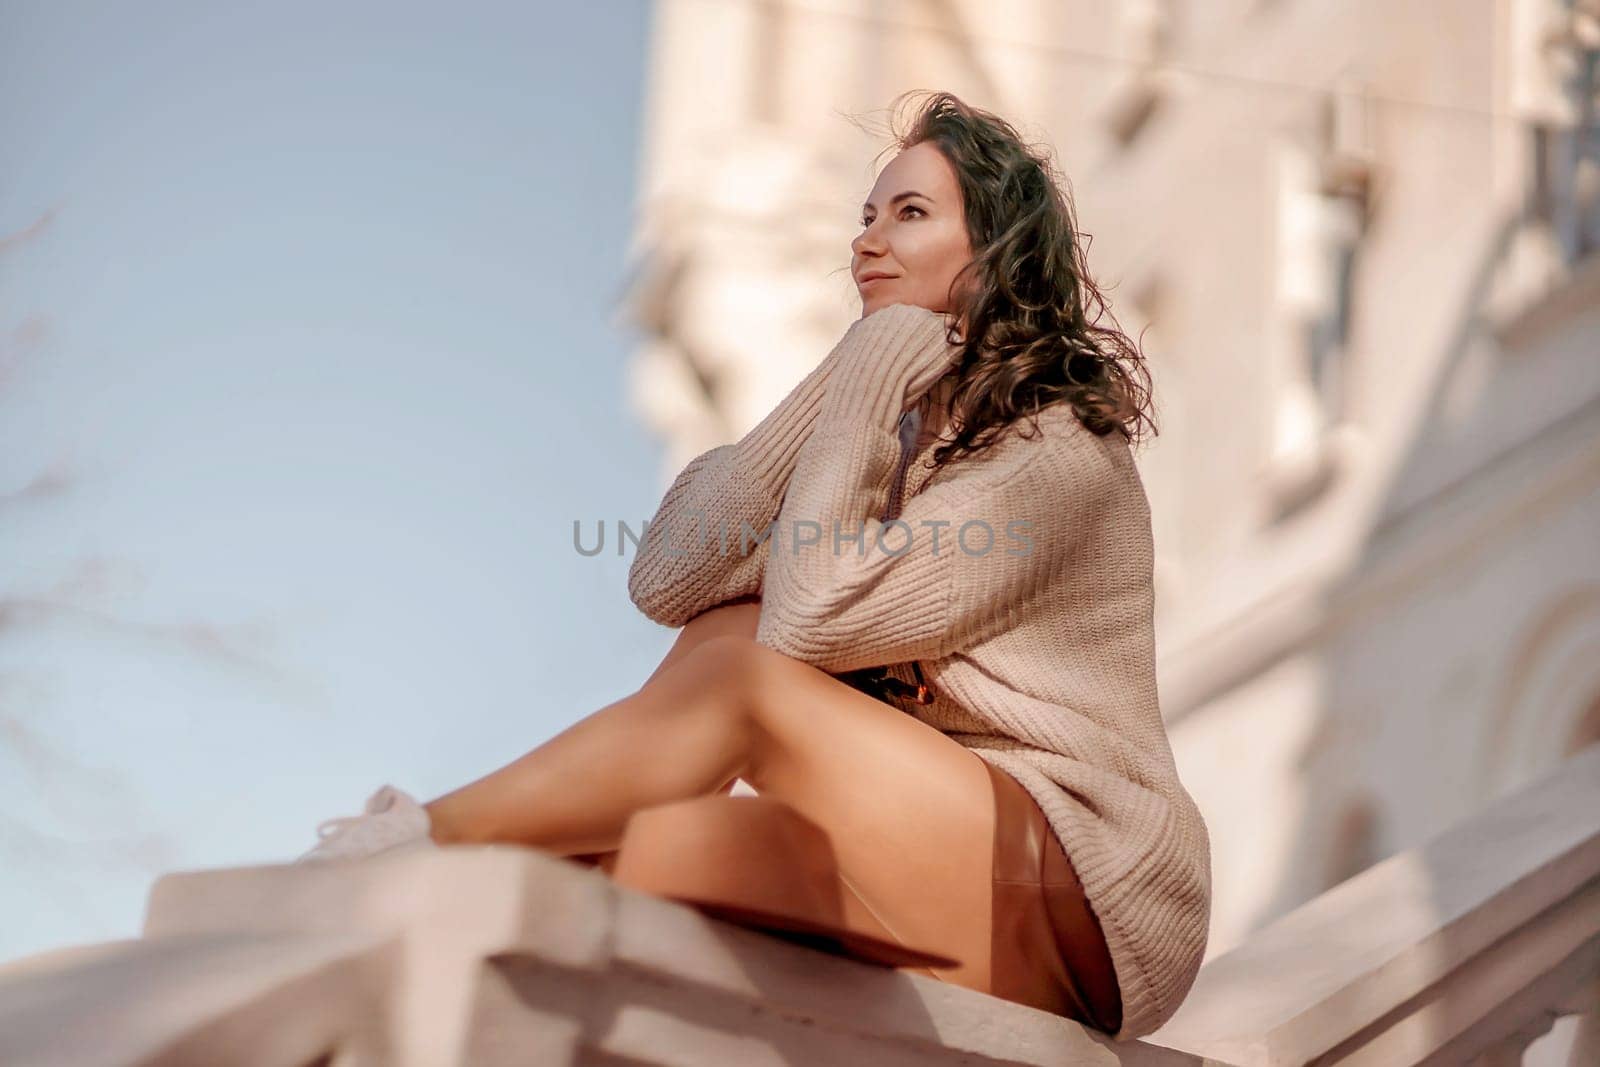 Portrait of a woman in front of a building and blue sky. Dressed in a loose light sweater, brown skirt. Tourism, walking around the sights of the city